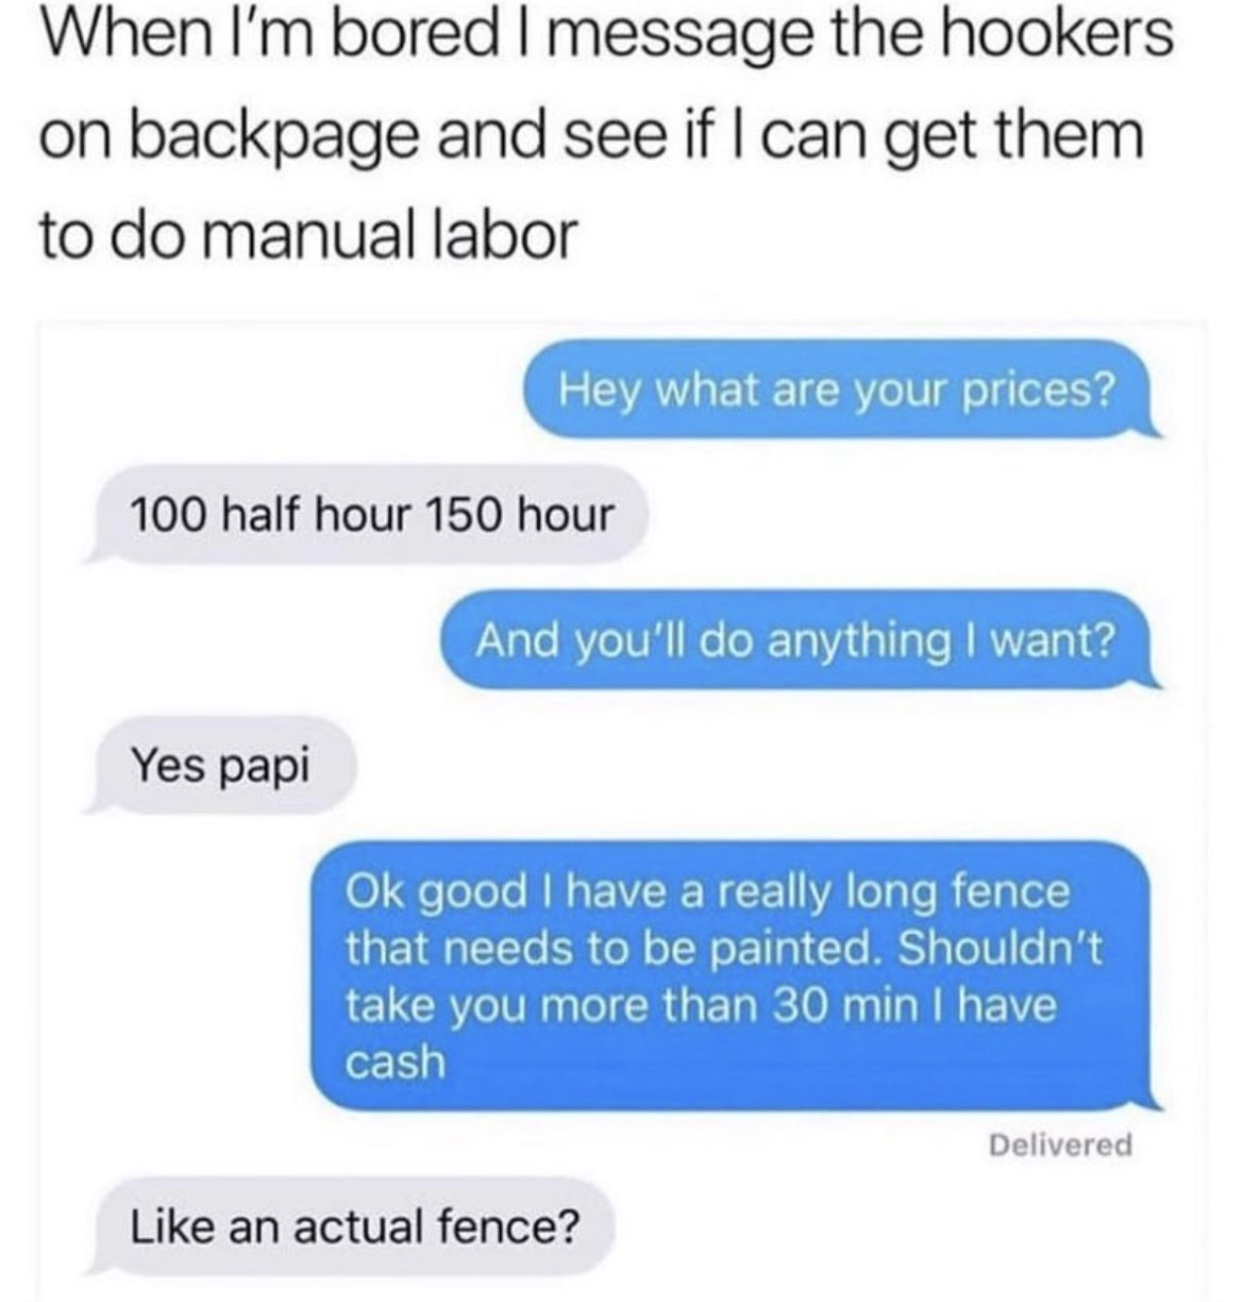 nagisa x karma texting - When I'm bored I message the hookers on backpage and see if I can get them to do manual labor Hey what are your prices? 100 half hour 150 hour And you'll do anything I want? Yes papi Ok good I have a really long fence that needs t